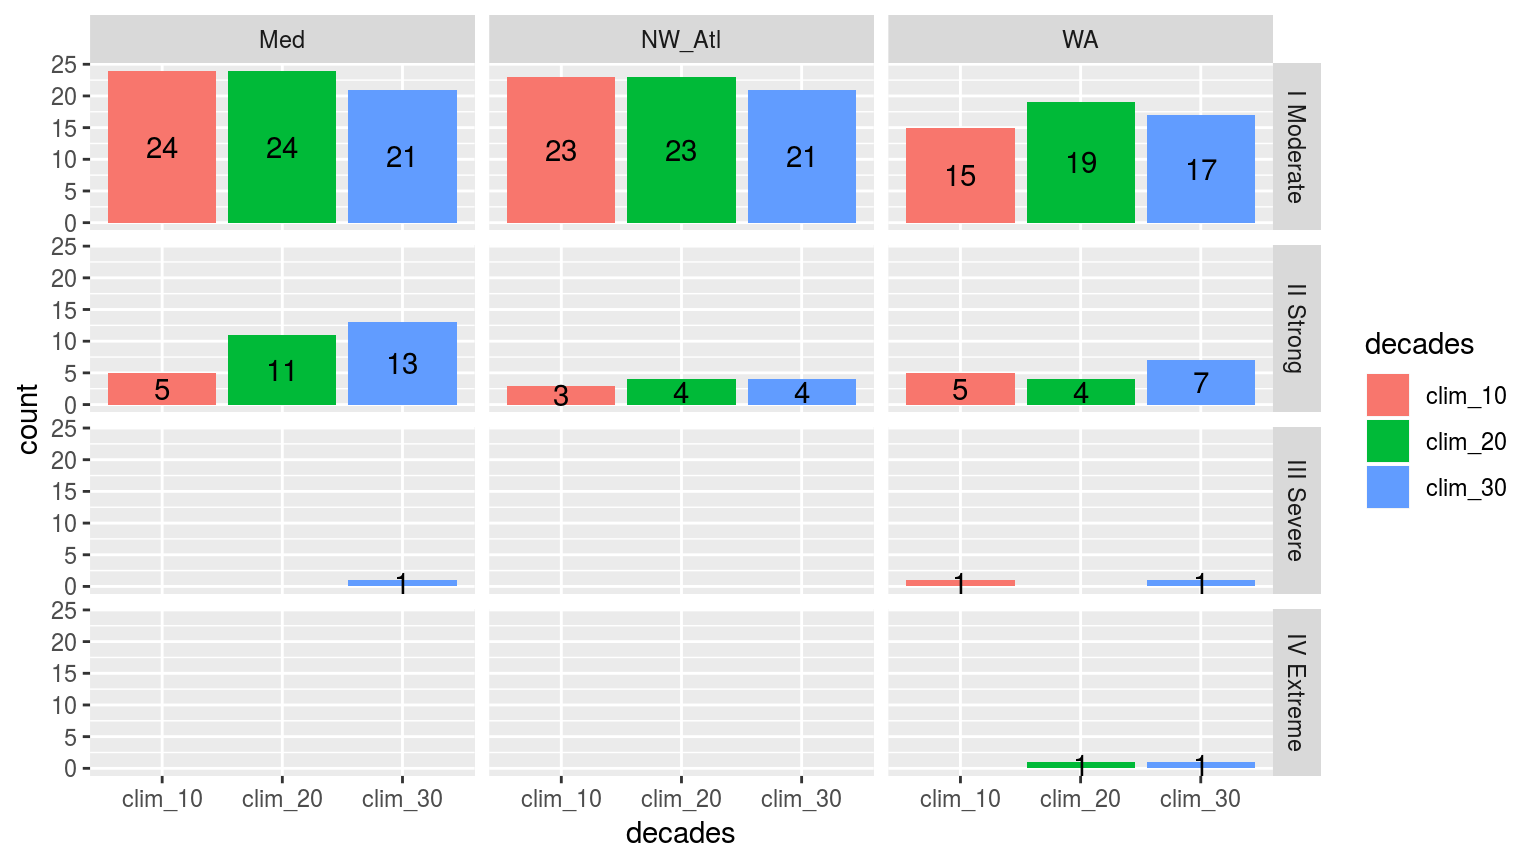 Simple bar plots showing the counts of the different categories of events faceted in a grid with different sites along the top and the different category classifications down the side. The colours of the bars denote the different climatology periods used. Note that the general trend is that more 'smaller' events are detected with a 10 year clim period, and more 'larger' events detected with the 30 year clim. The 20 year clim tends to rest in the middle.